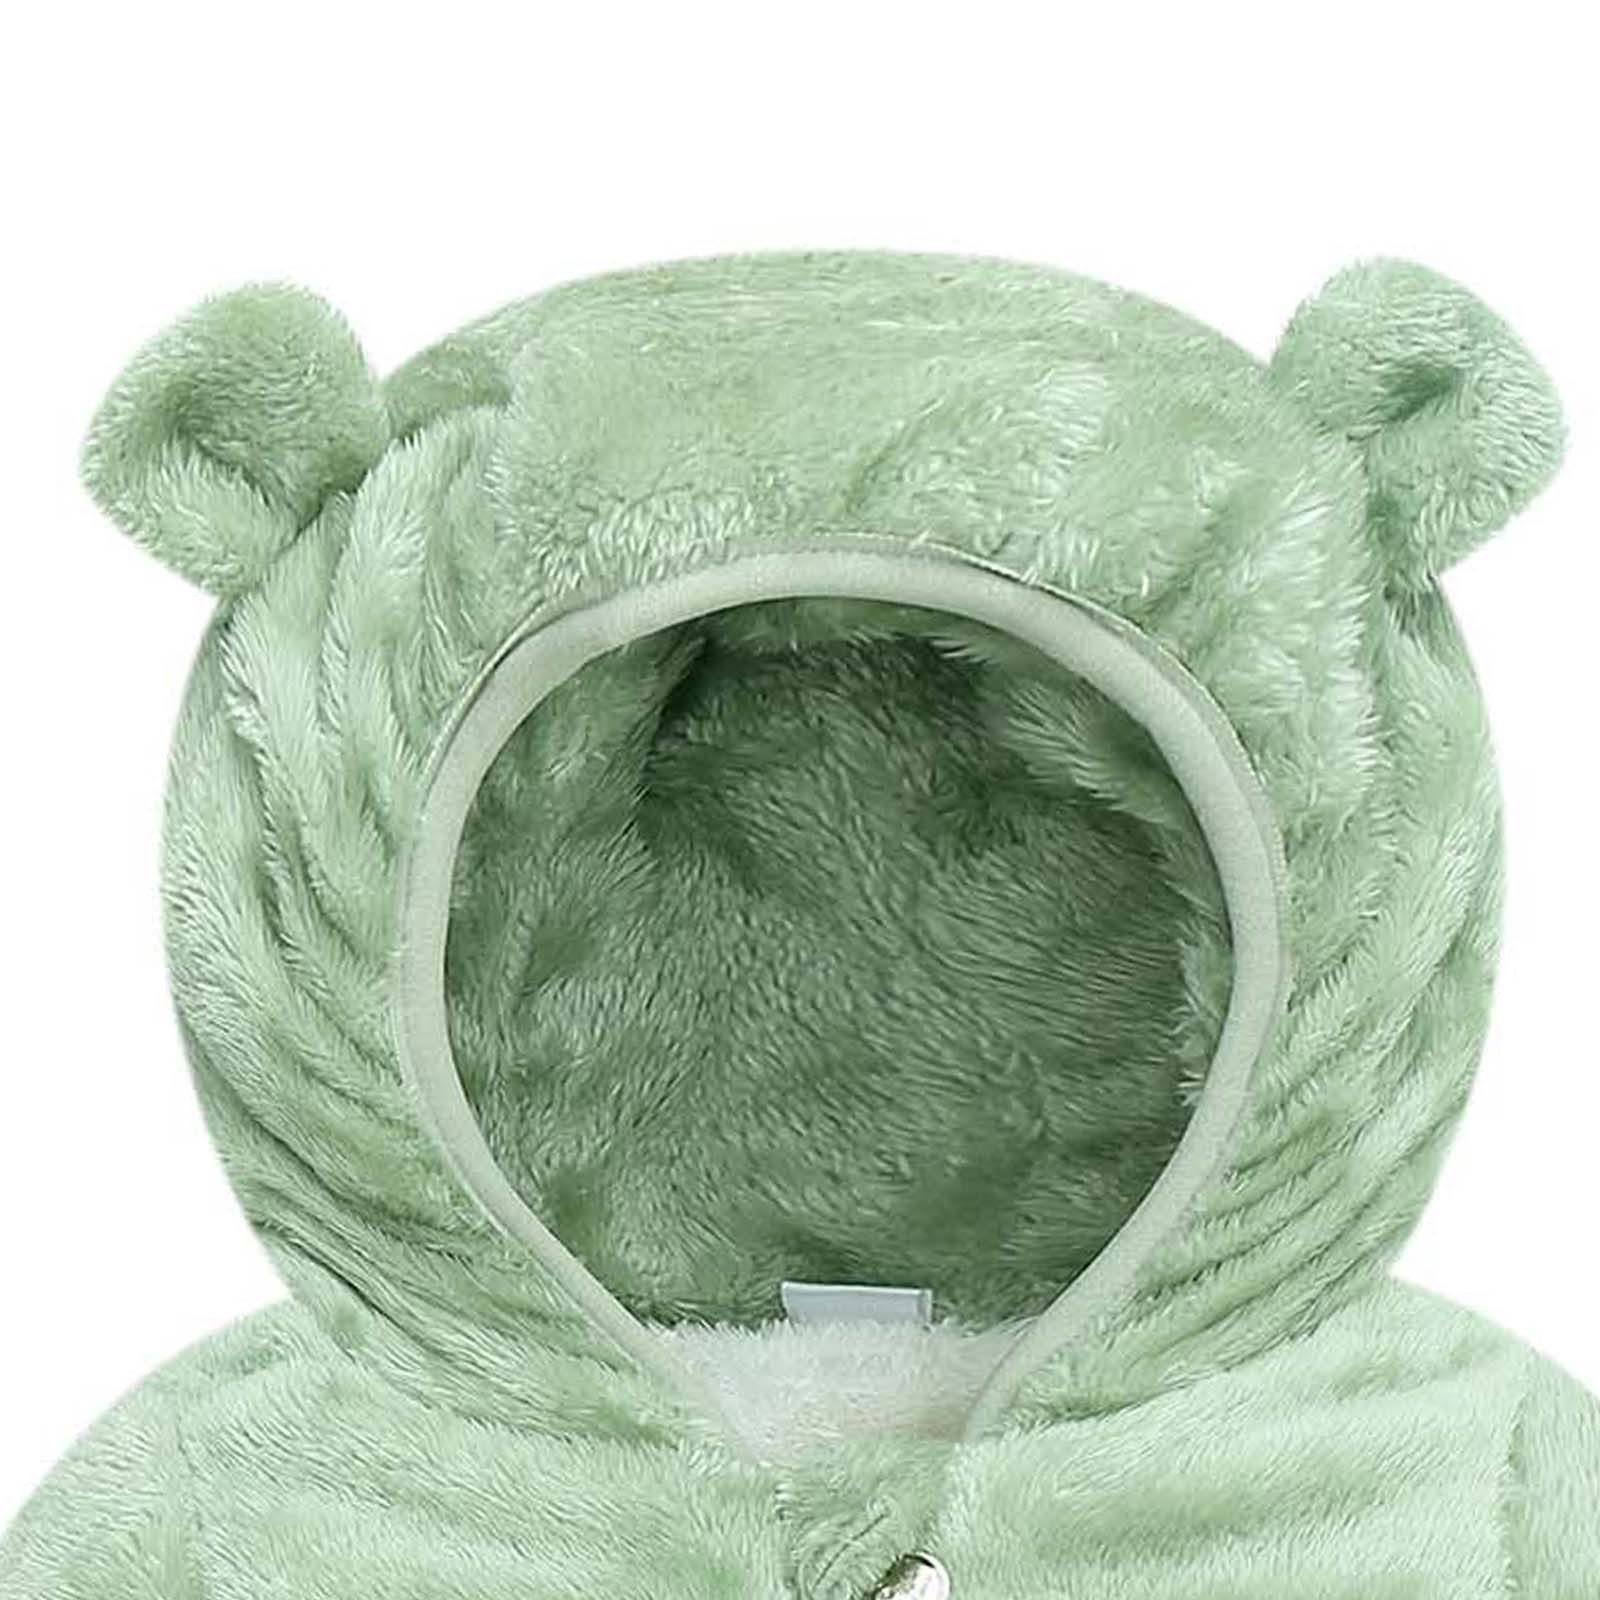 Tagold Boys and Girls Winter Cotton Coats Outerwear Jackets Baby Kids Fleece Hoodie Tops Fall Winter Hooded Jacket Solid Coat Gifts for Kids on Clearance Green 6-12 Months - image 5 of 5